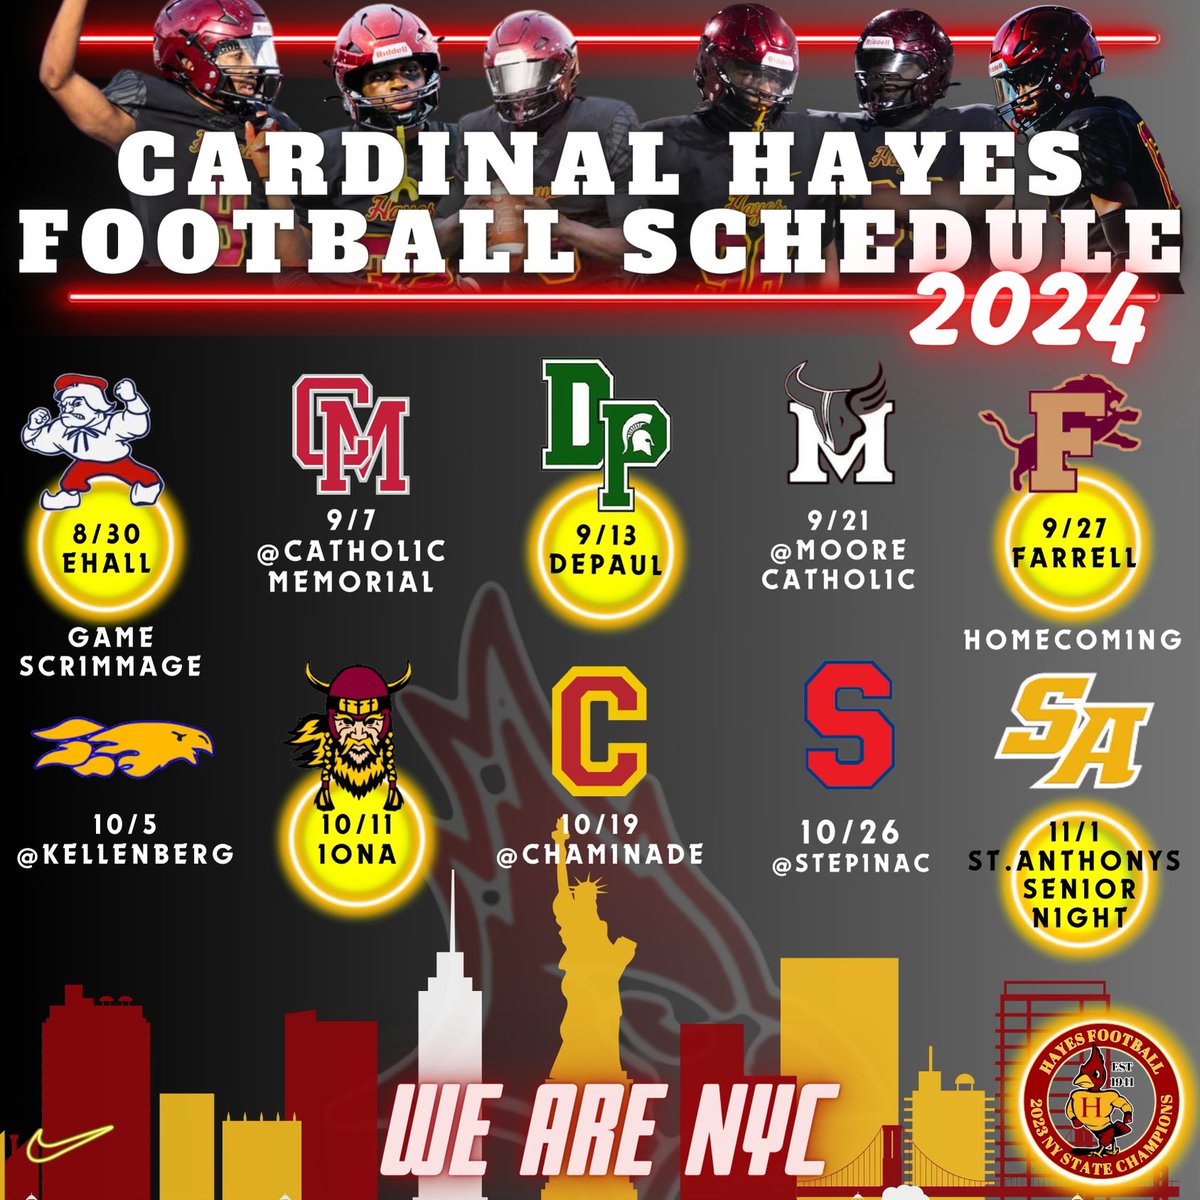 ❗️🚨❗️BOOM❗️🚨❗️ The State Champs 2024 Schedule is here!!! Looking forward to continuing to raise the bar and play tough games week in and week out. The journey has begun…#UpHayes🔴🟡 #WeAreNYC